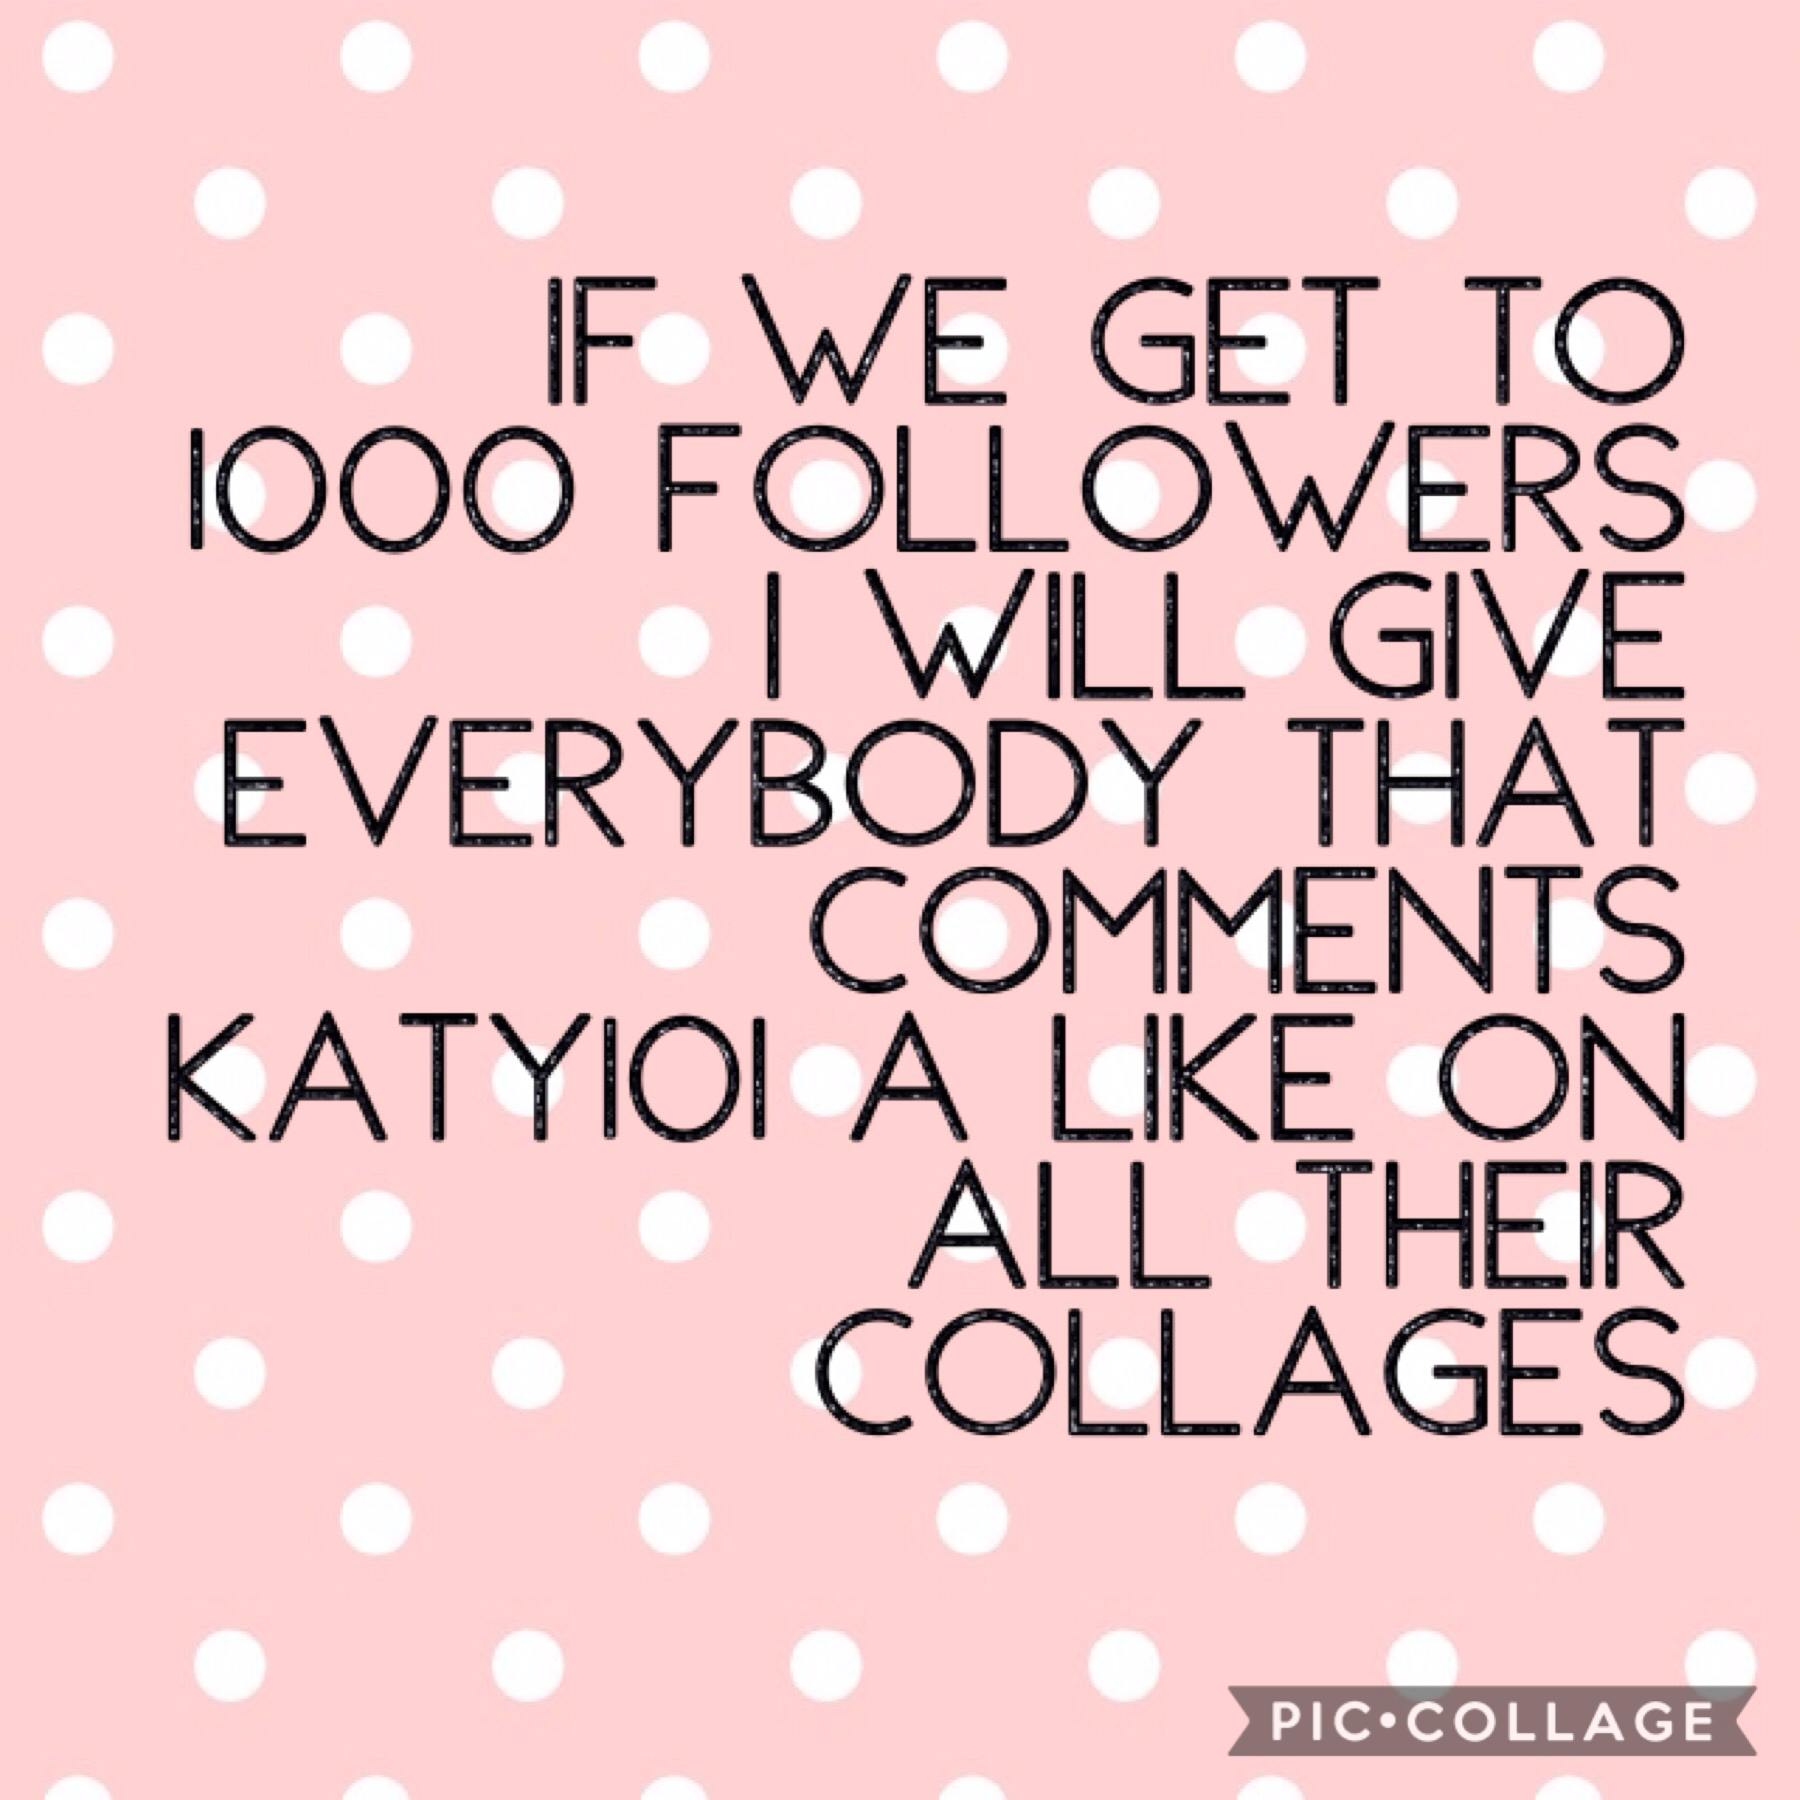 COMMENT KATY101 FOR LIKES ON ALLLLLLLLLL YOUR COLLAGES!!!!!!!!!